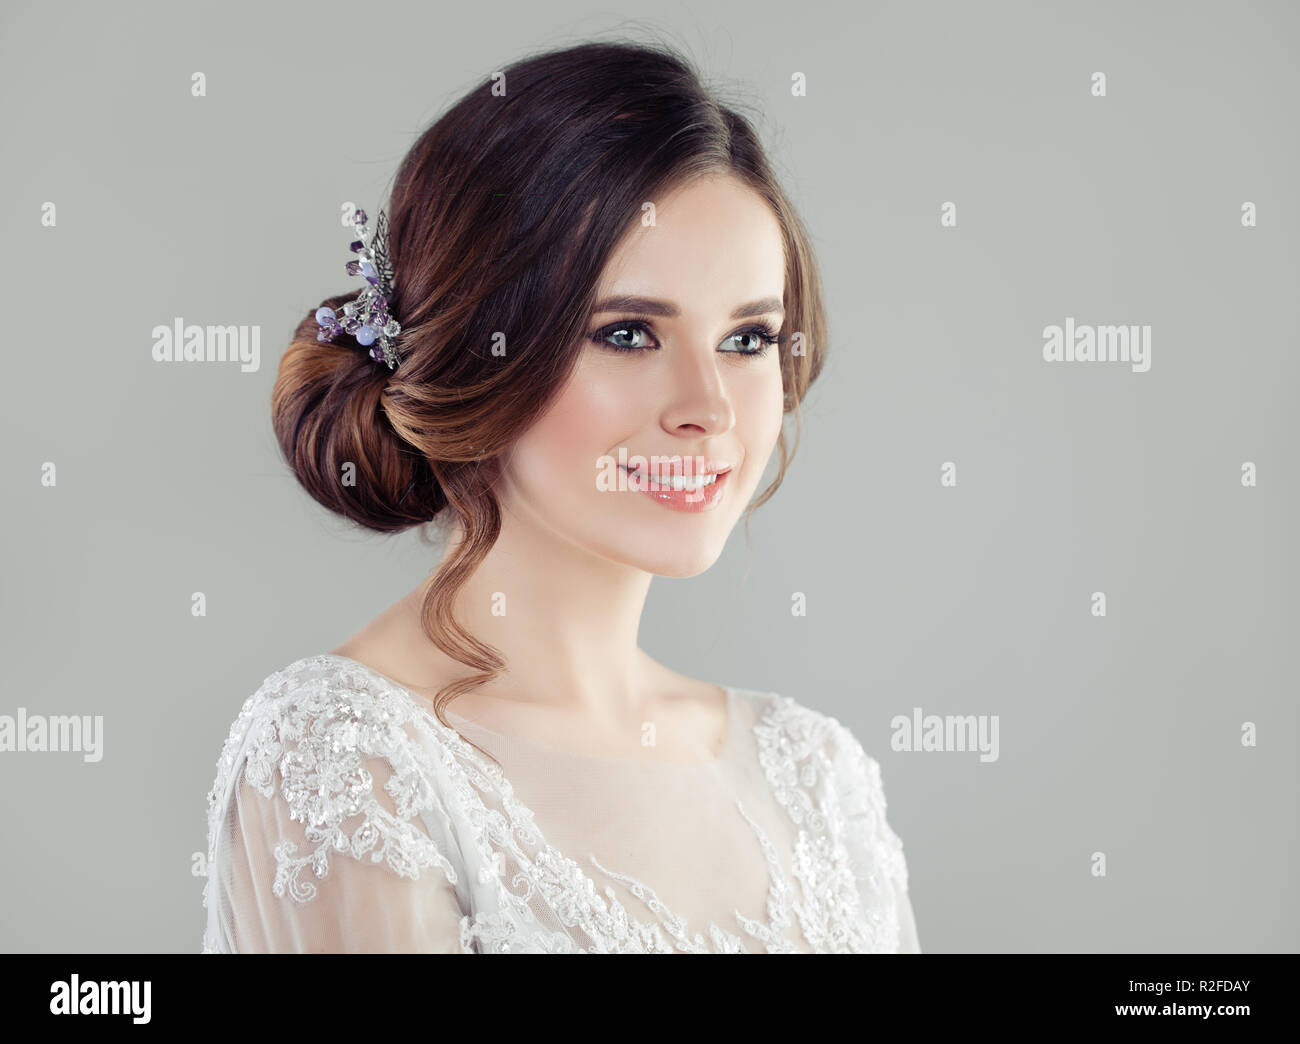 Cheerful woman with bridal updo hair, portrait Stock Photo